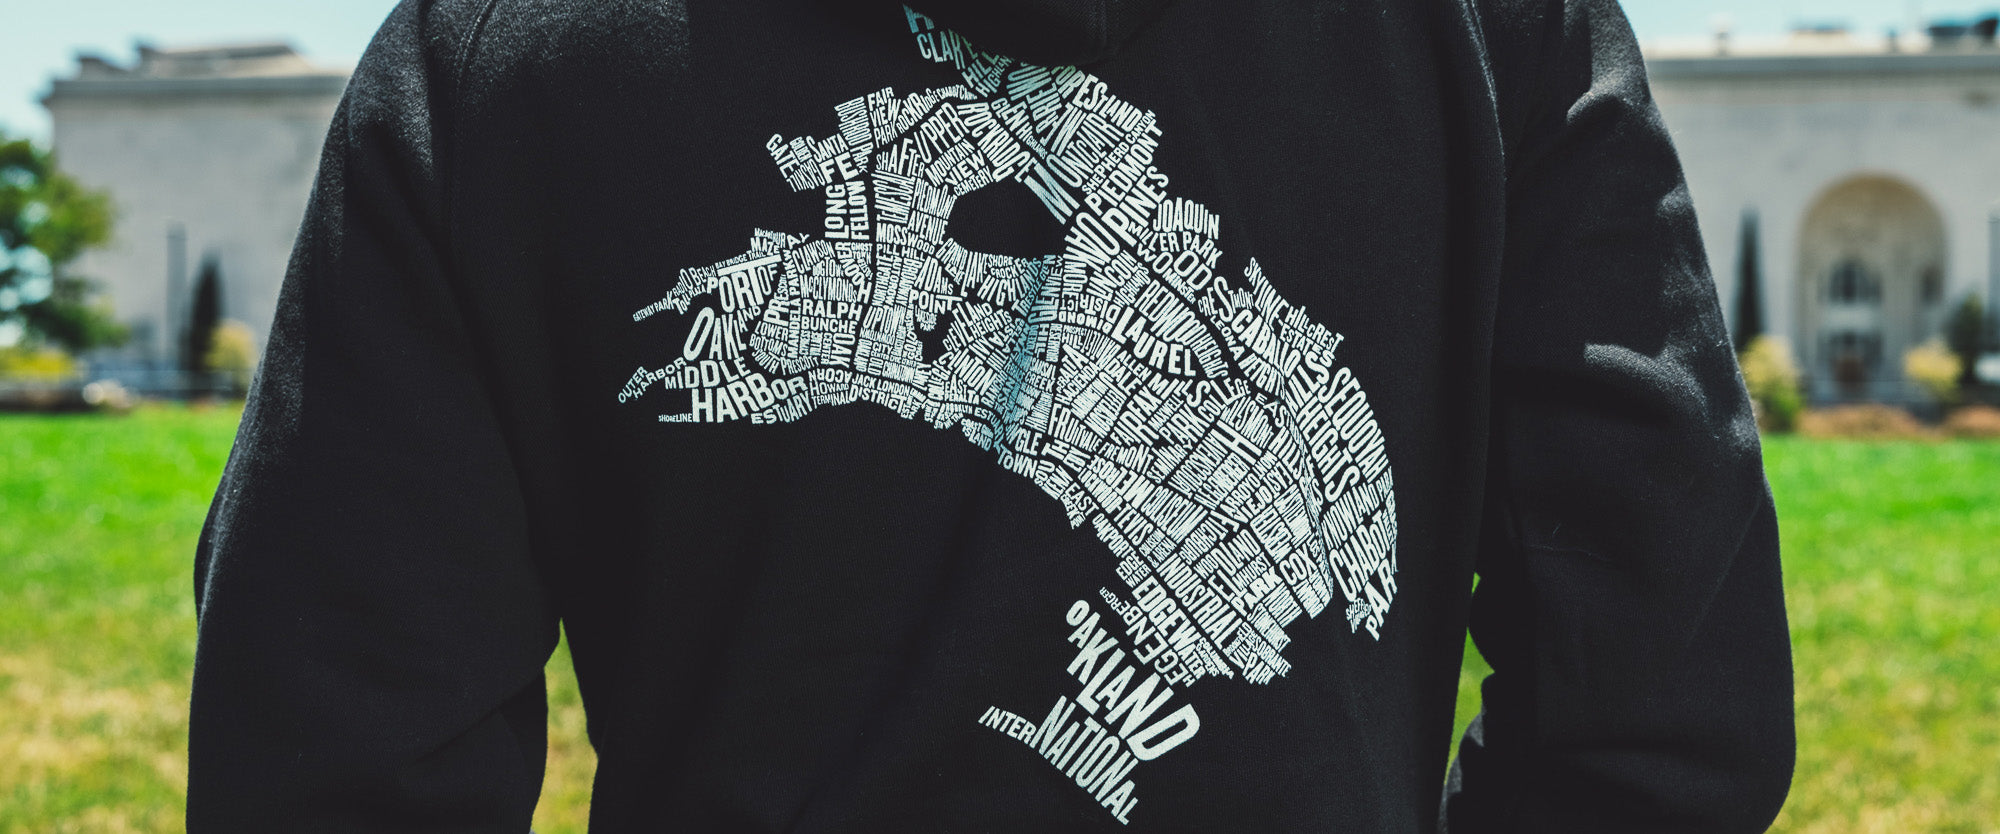 A man on the with a view of the backside of his black zip hoodie with a graphic of an Oakland neighborhood map.